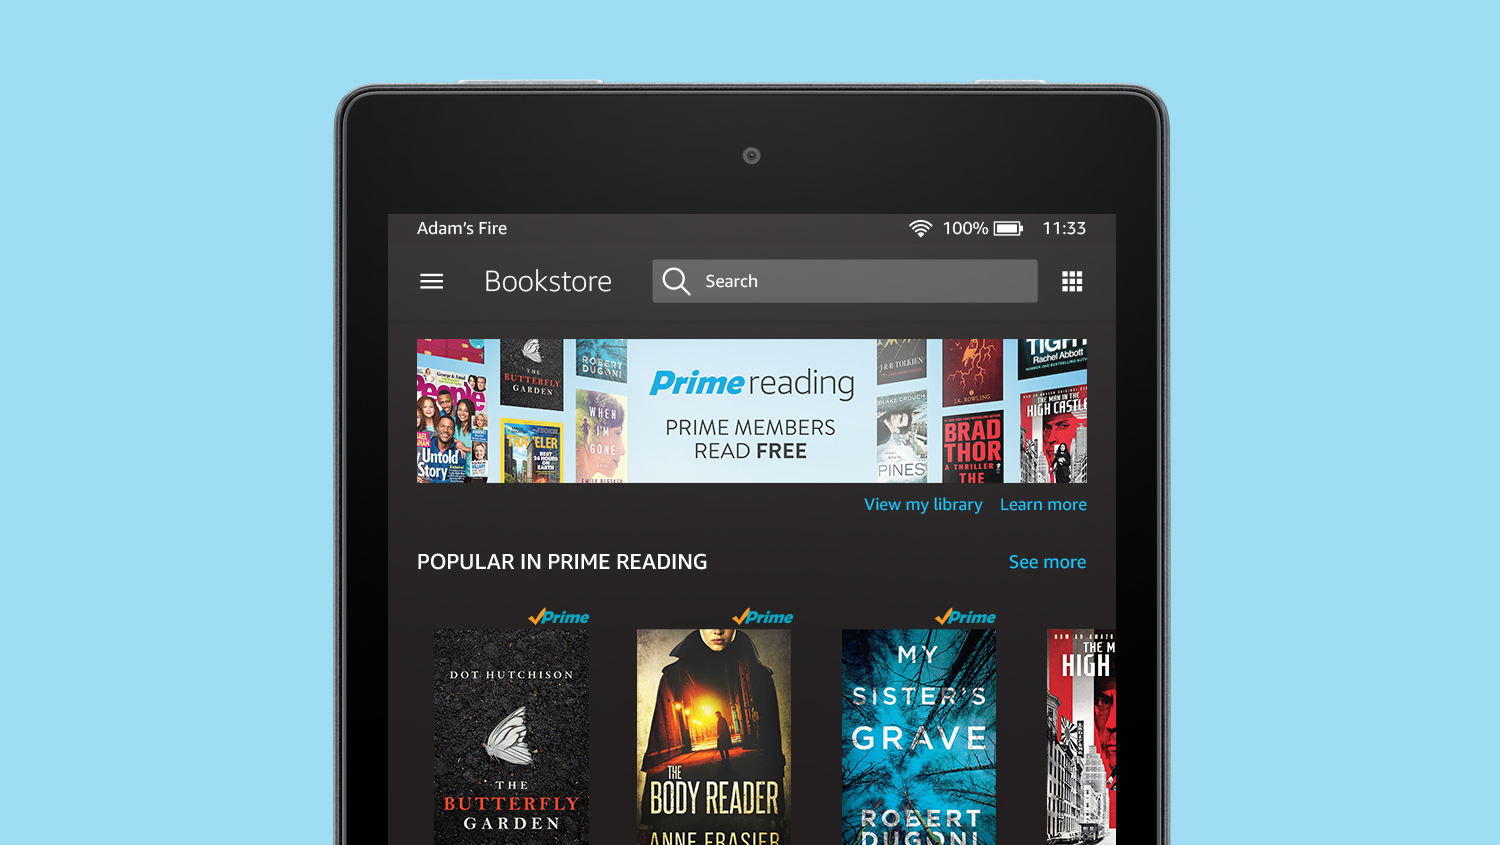 Amazon Prime Members Will Now Have Access To Library Of Free E-Books